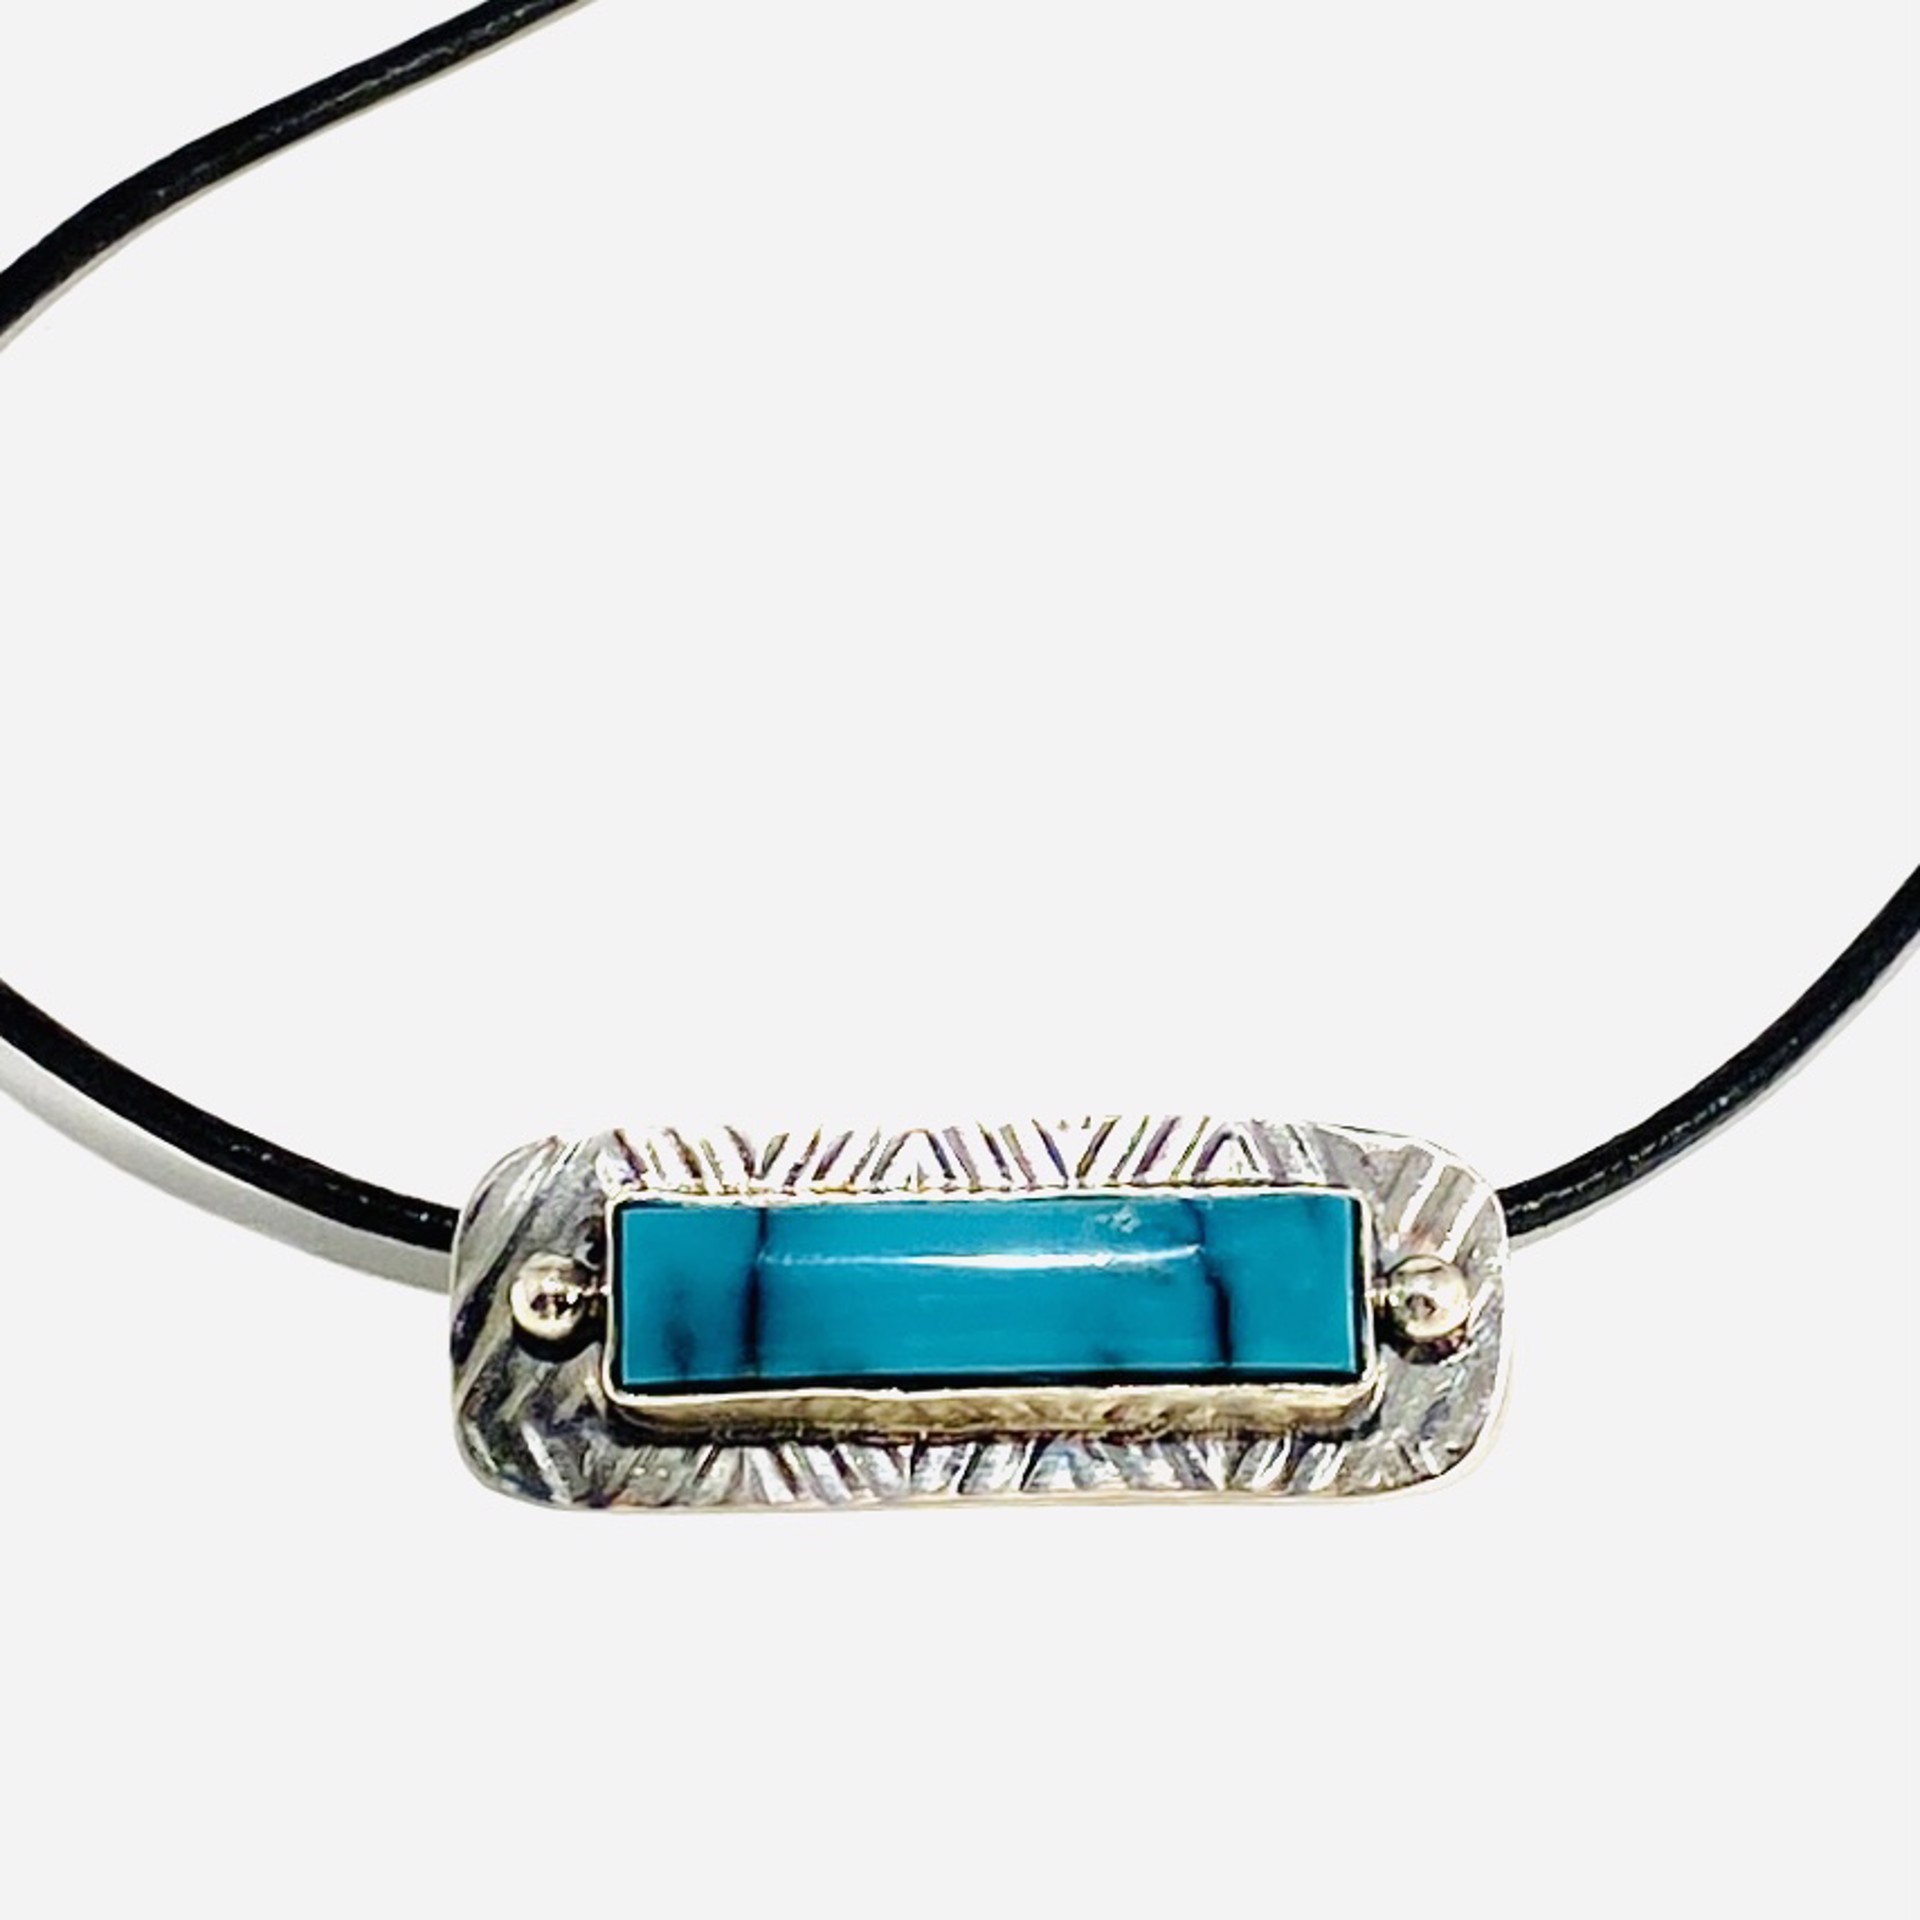 Rectangle Turquoise on Rectangular Silver Disc 18”Slim Leather Cord Necklace AB23-39 by Anne Bivens